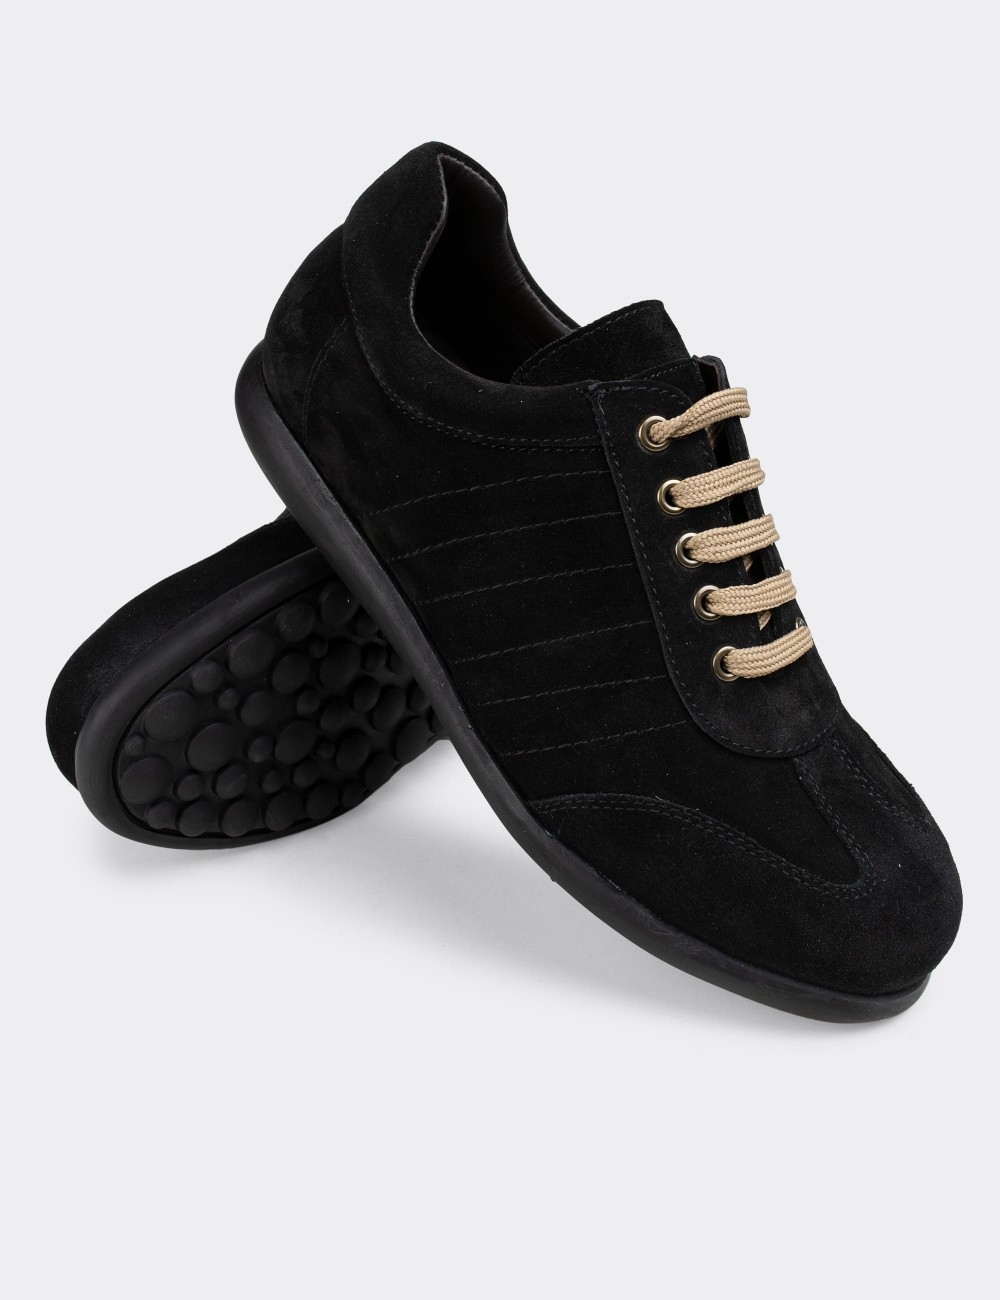 Black Suede Leather Lace-up Shoes - 01826MSYHC02